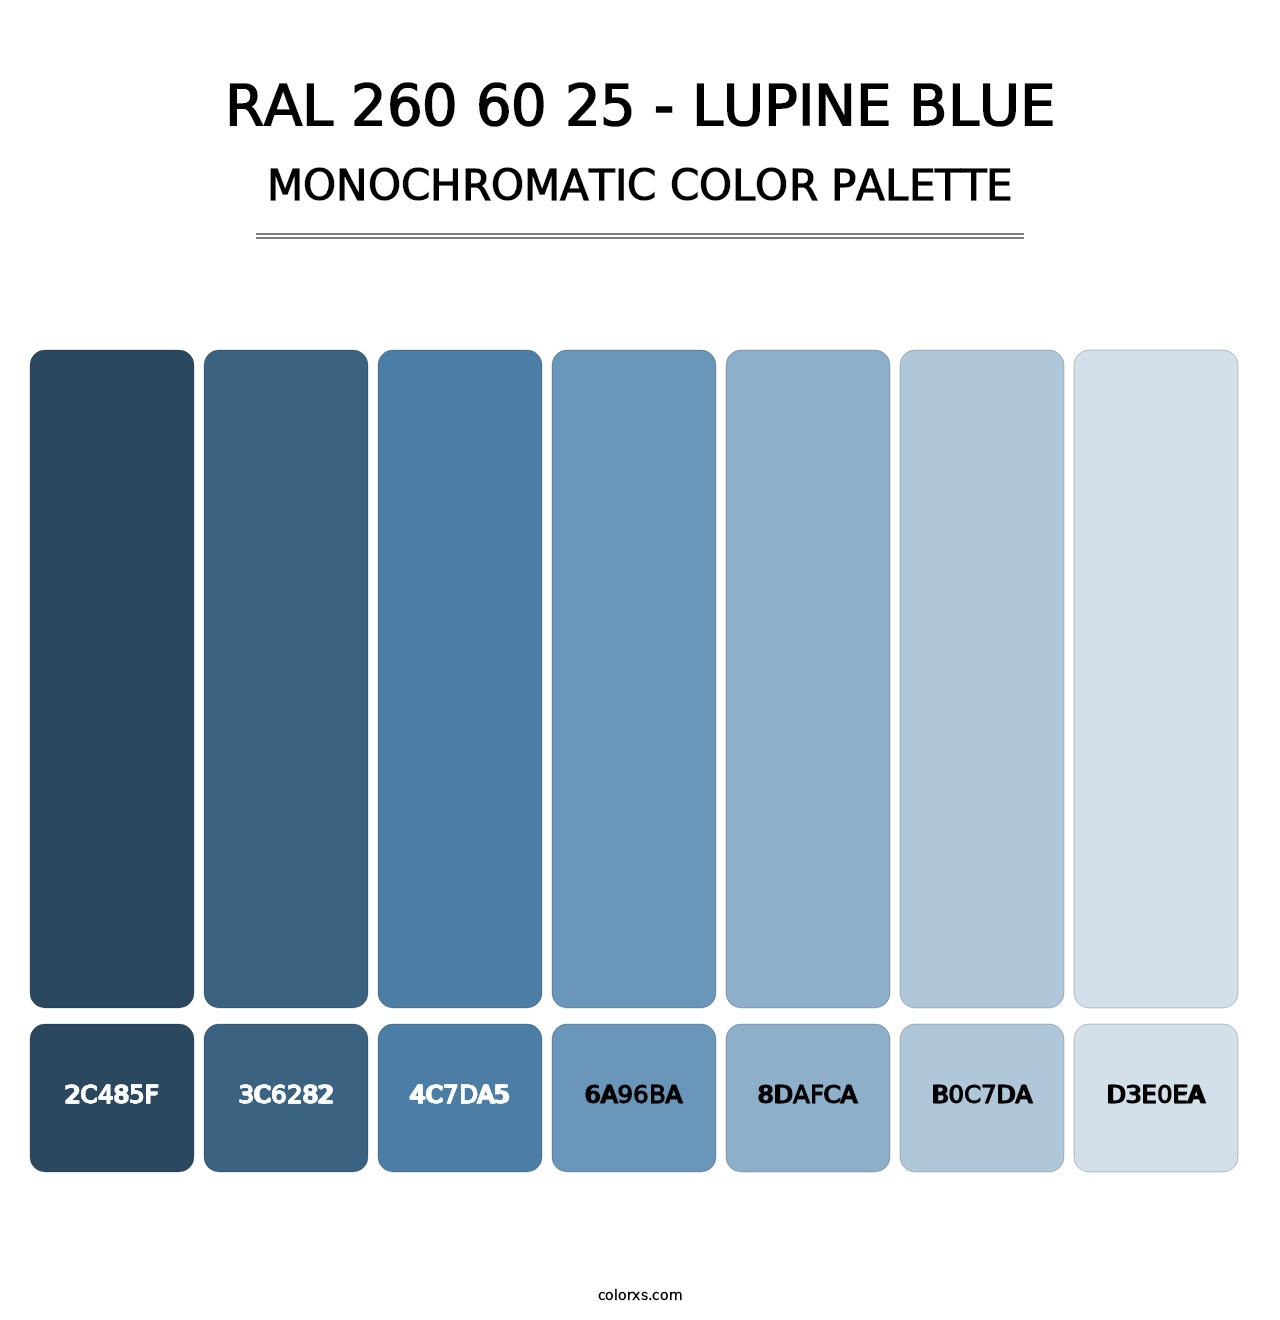 RAL 260 60 25 - Lupine Blue - Monochromatic Color Palette